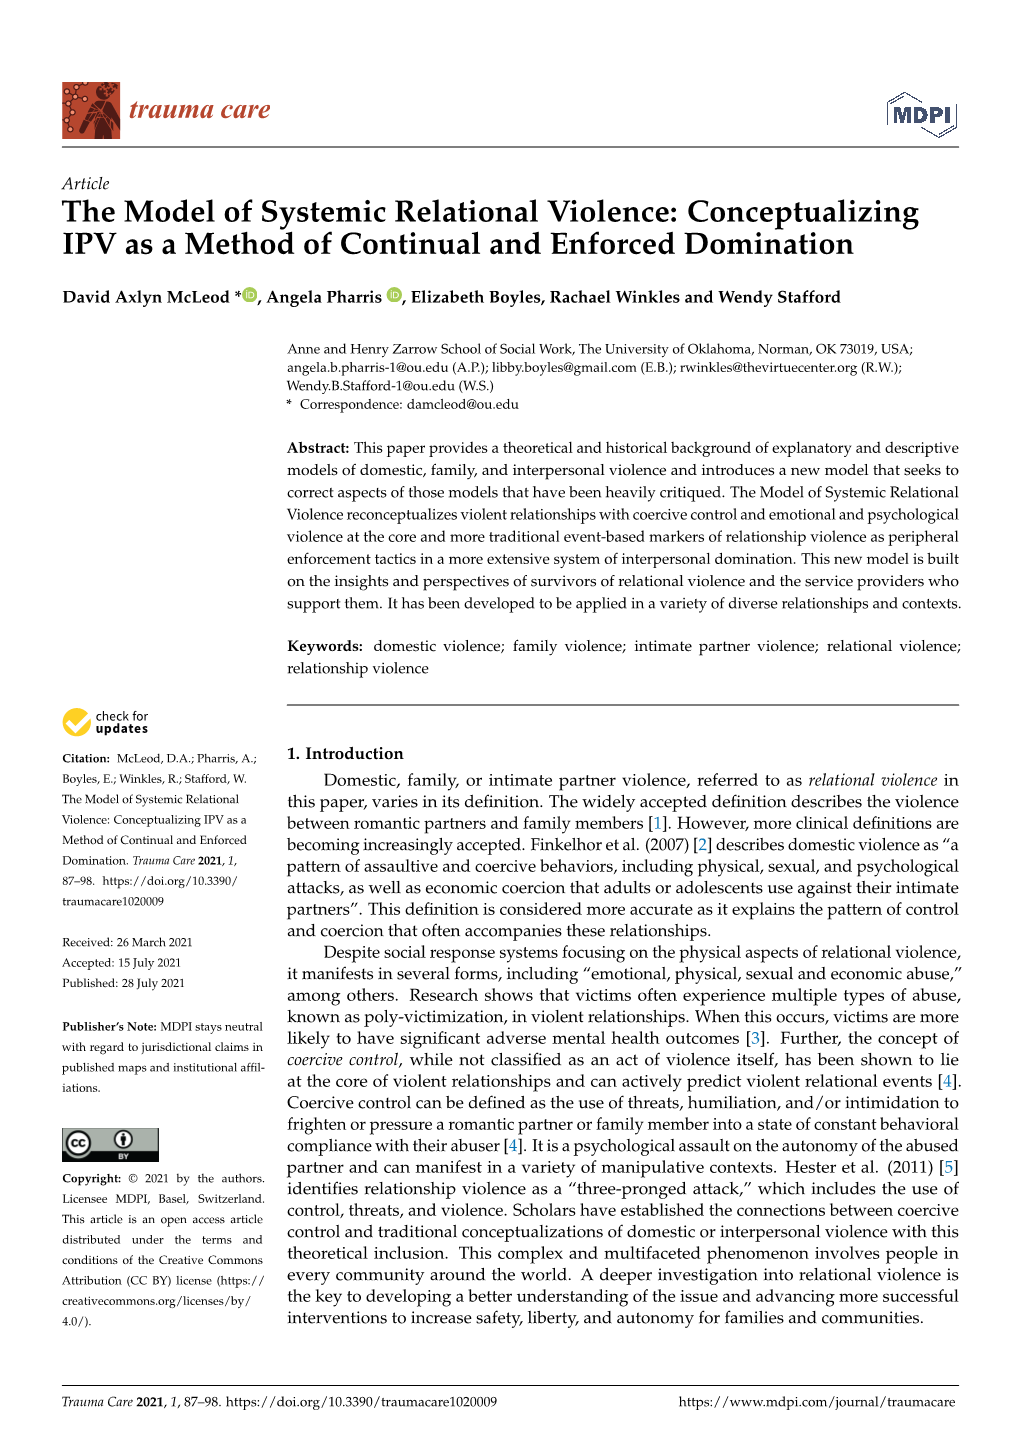 The Model of Systemic Relational Violence: Conceptualizing IPV As a Method of Continual and Enforced Domination